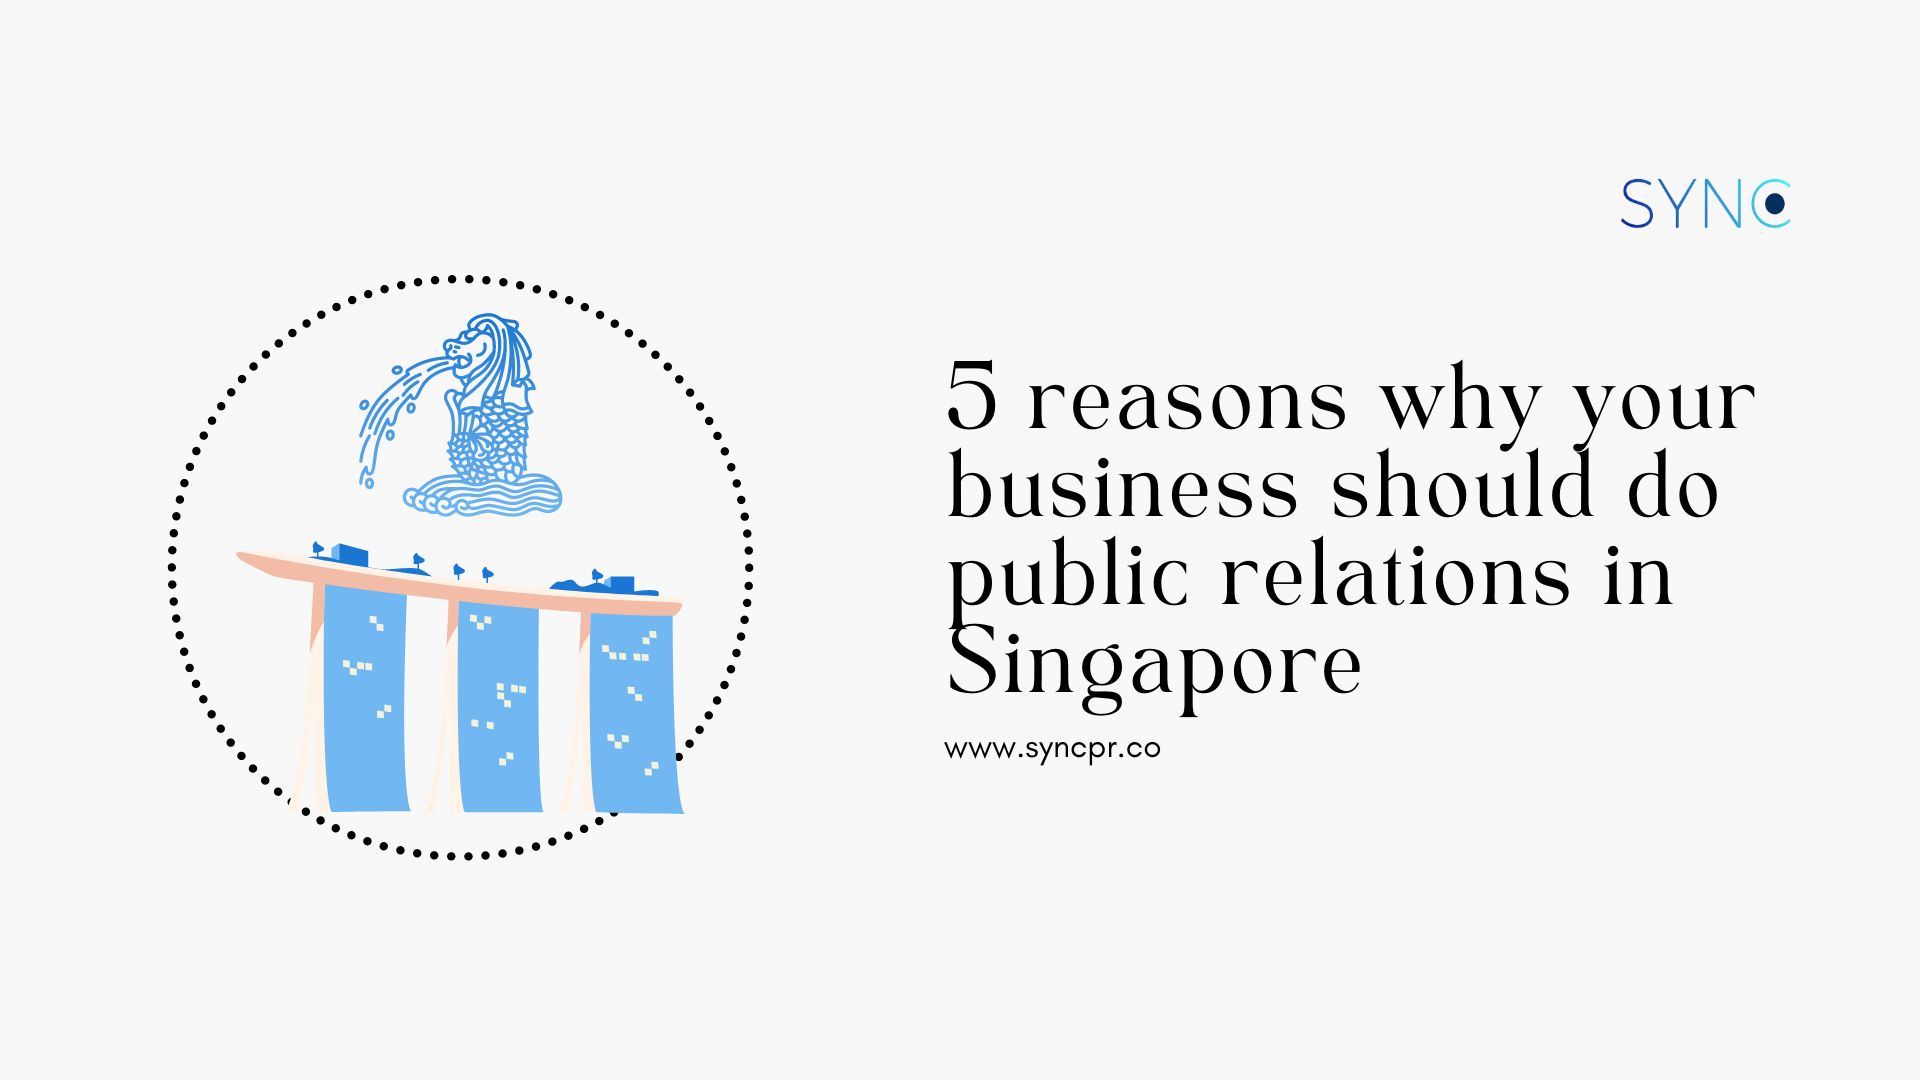 5 reasons why your business should do public relations in Singapore